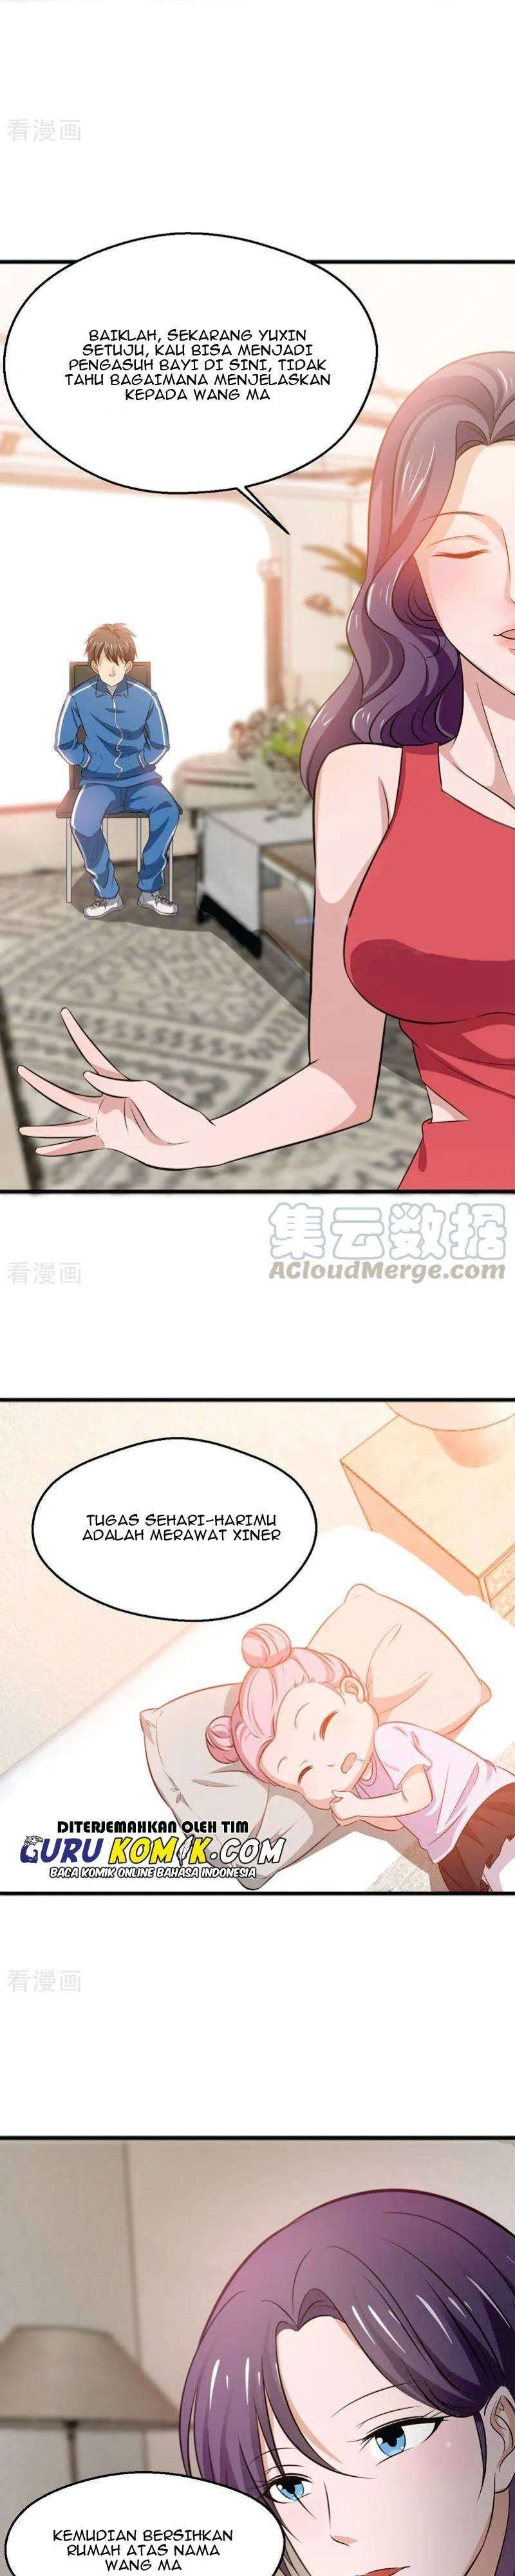 Close Mad Doctor Chapter 24-27